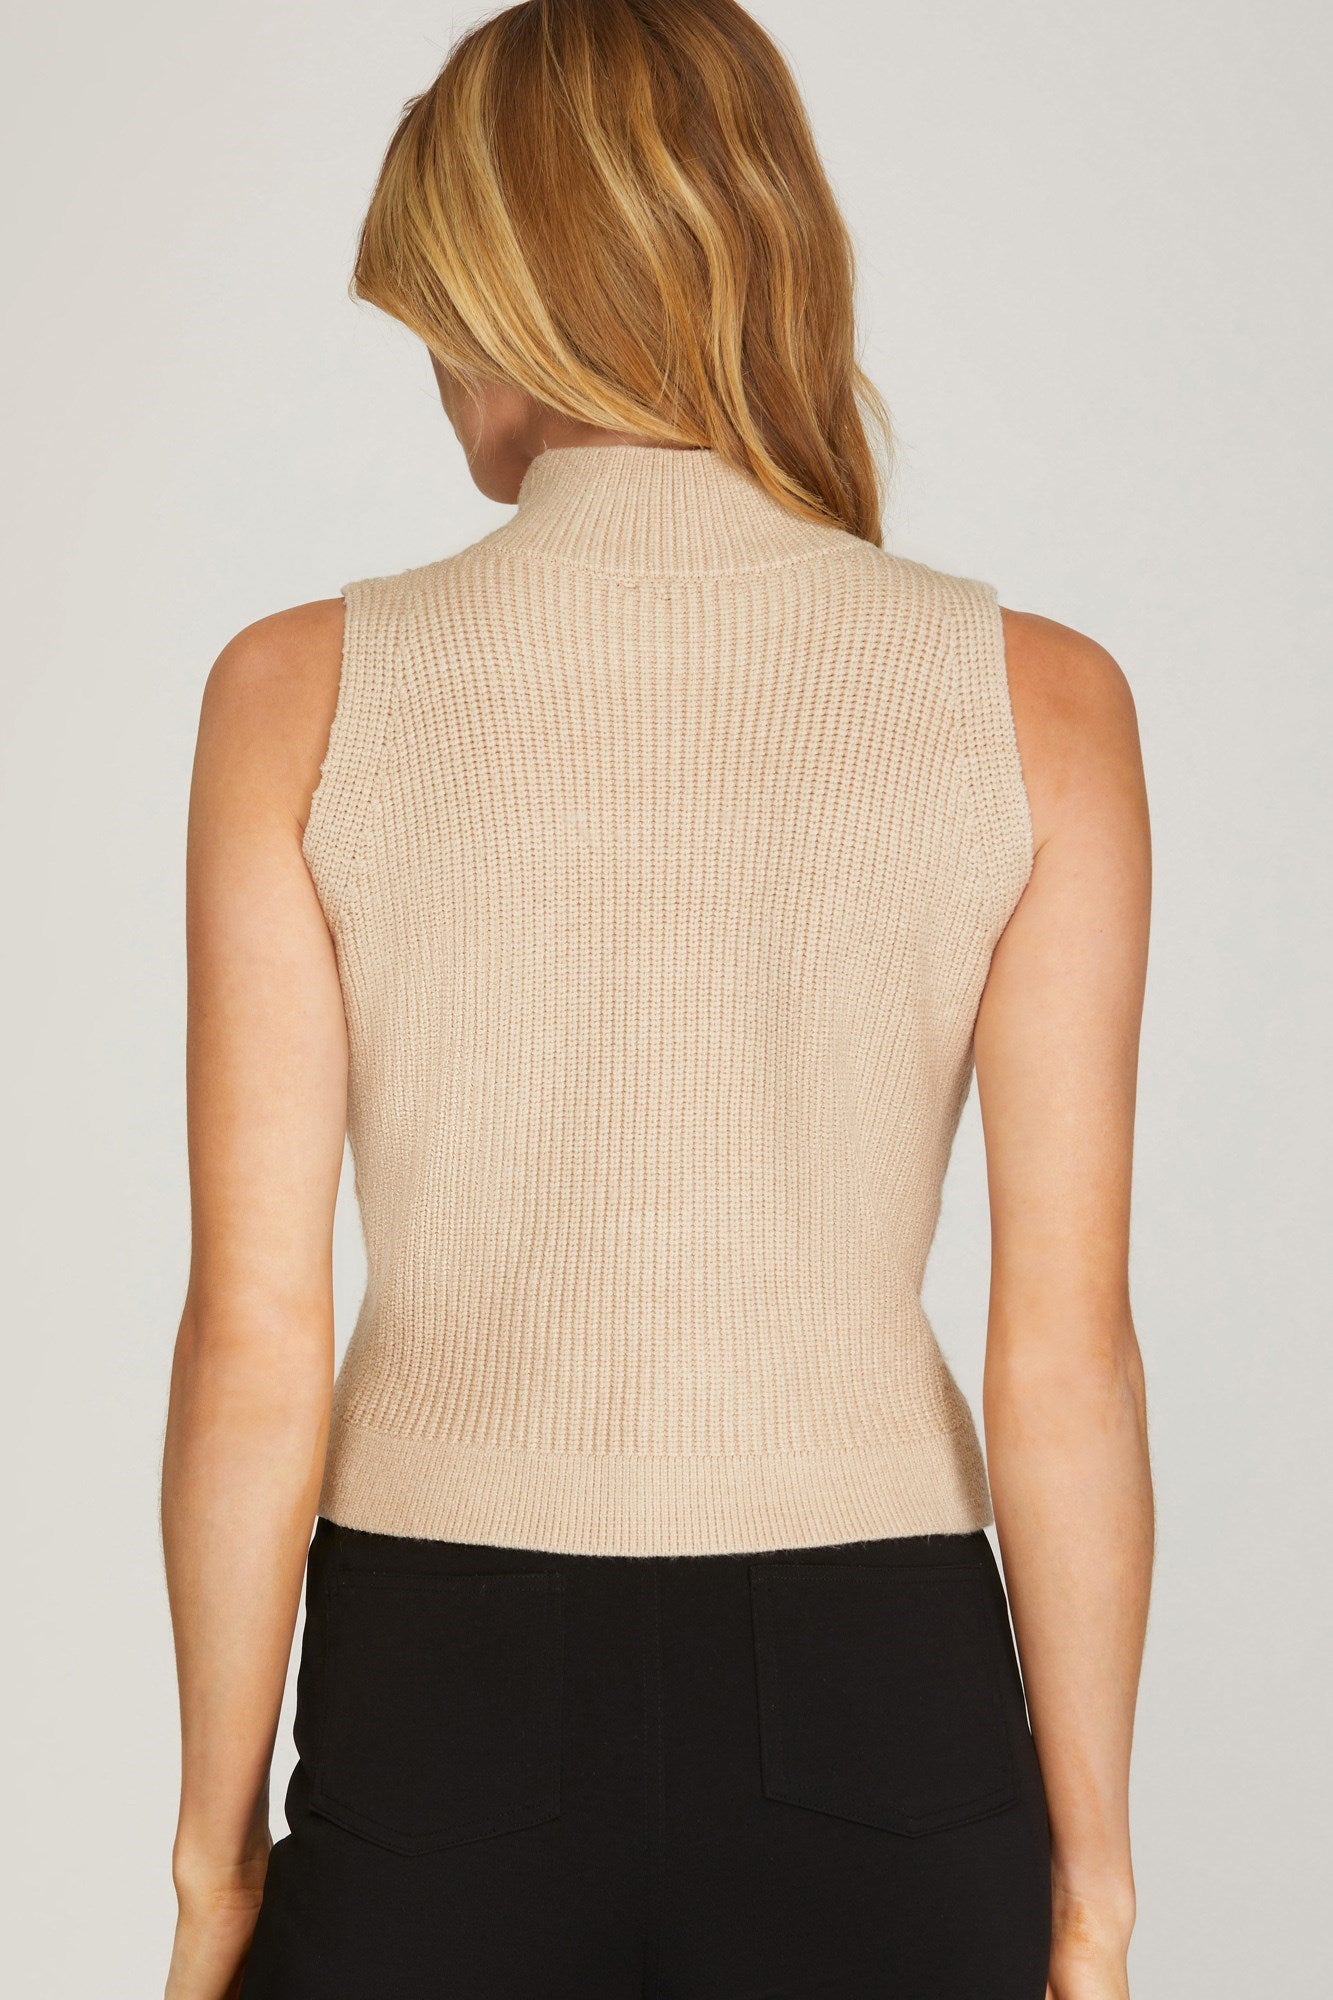 SHE AND SKY Women's Top Mock Neck Knit Sweater Vest || David's Clothing